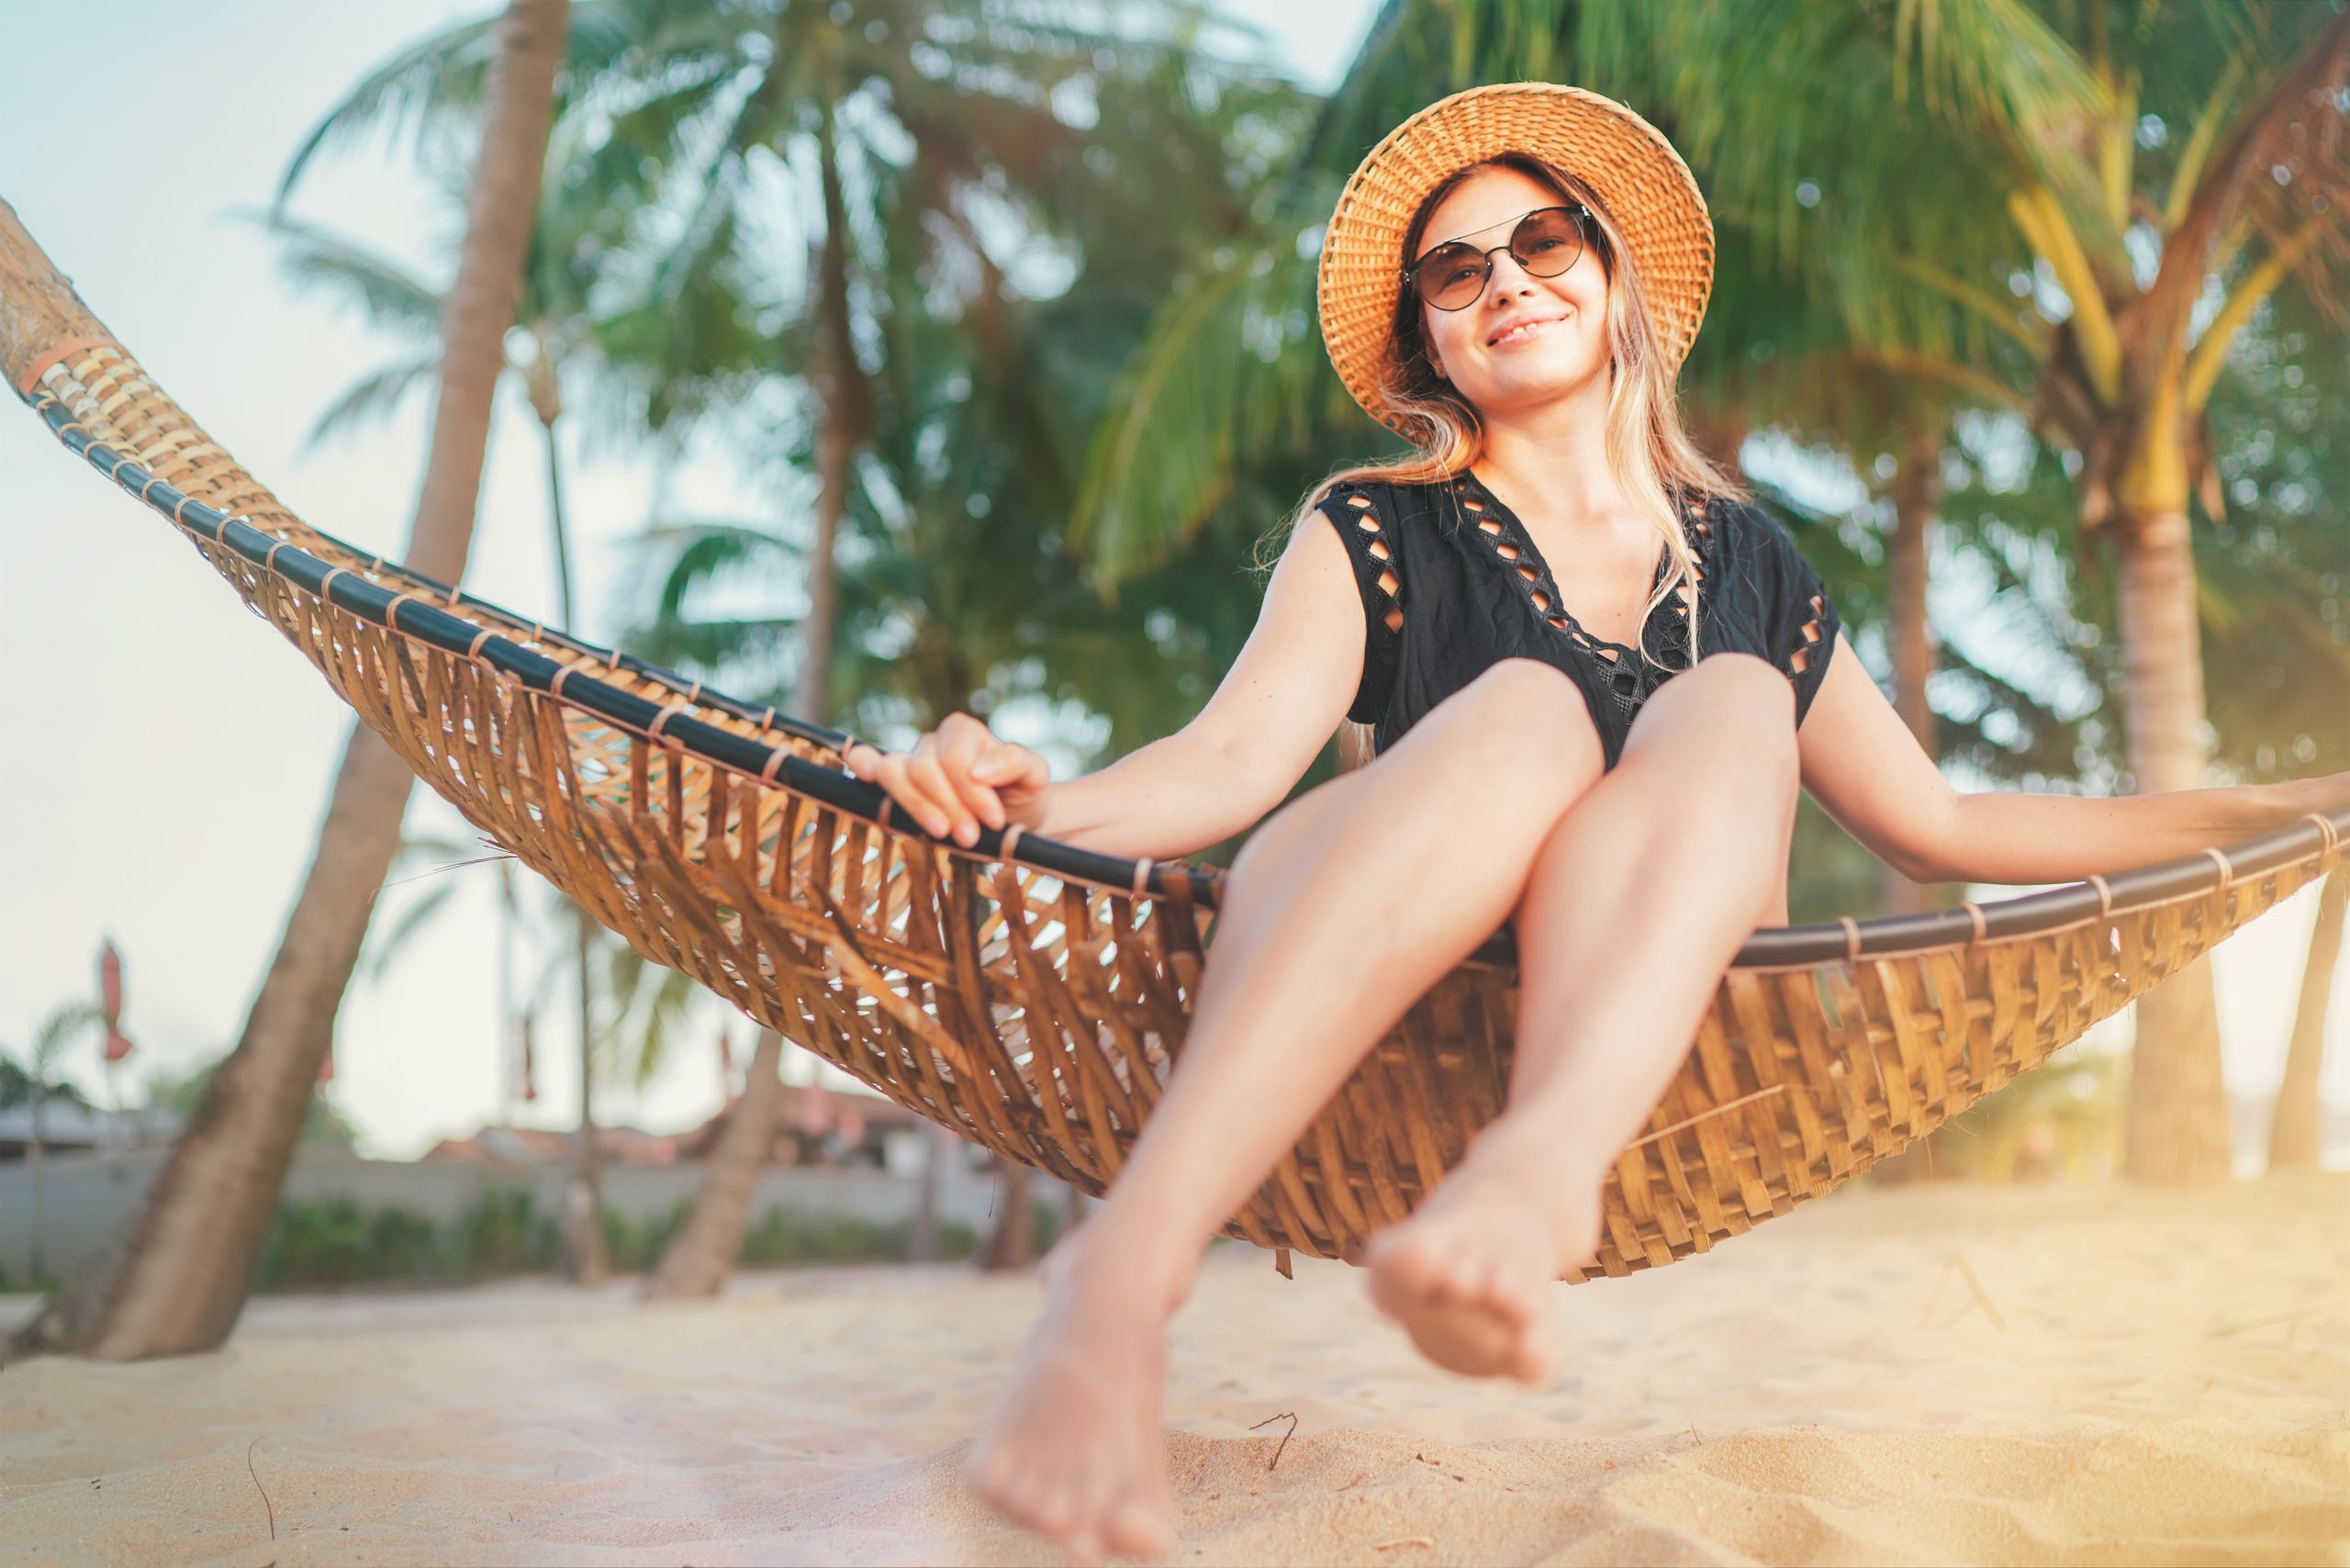 5 Easy Ways to Make Bank from the Beach (aka How to Keep the Sales Flowing While on Vacation)